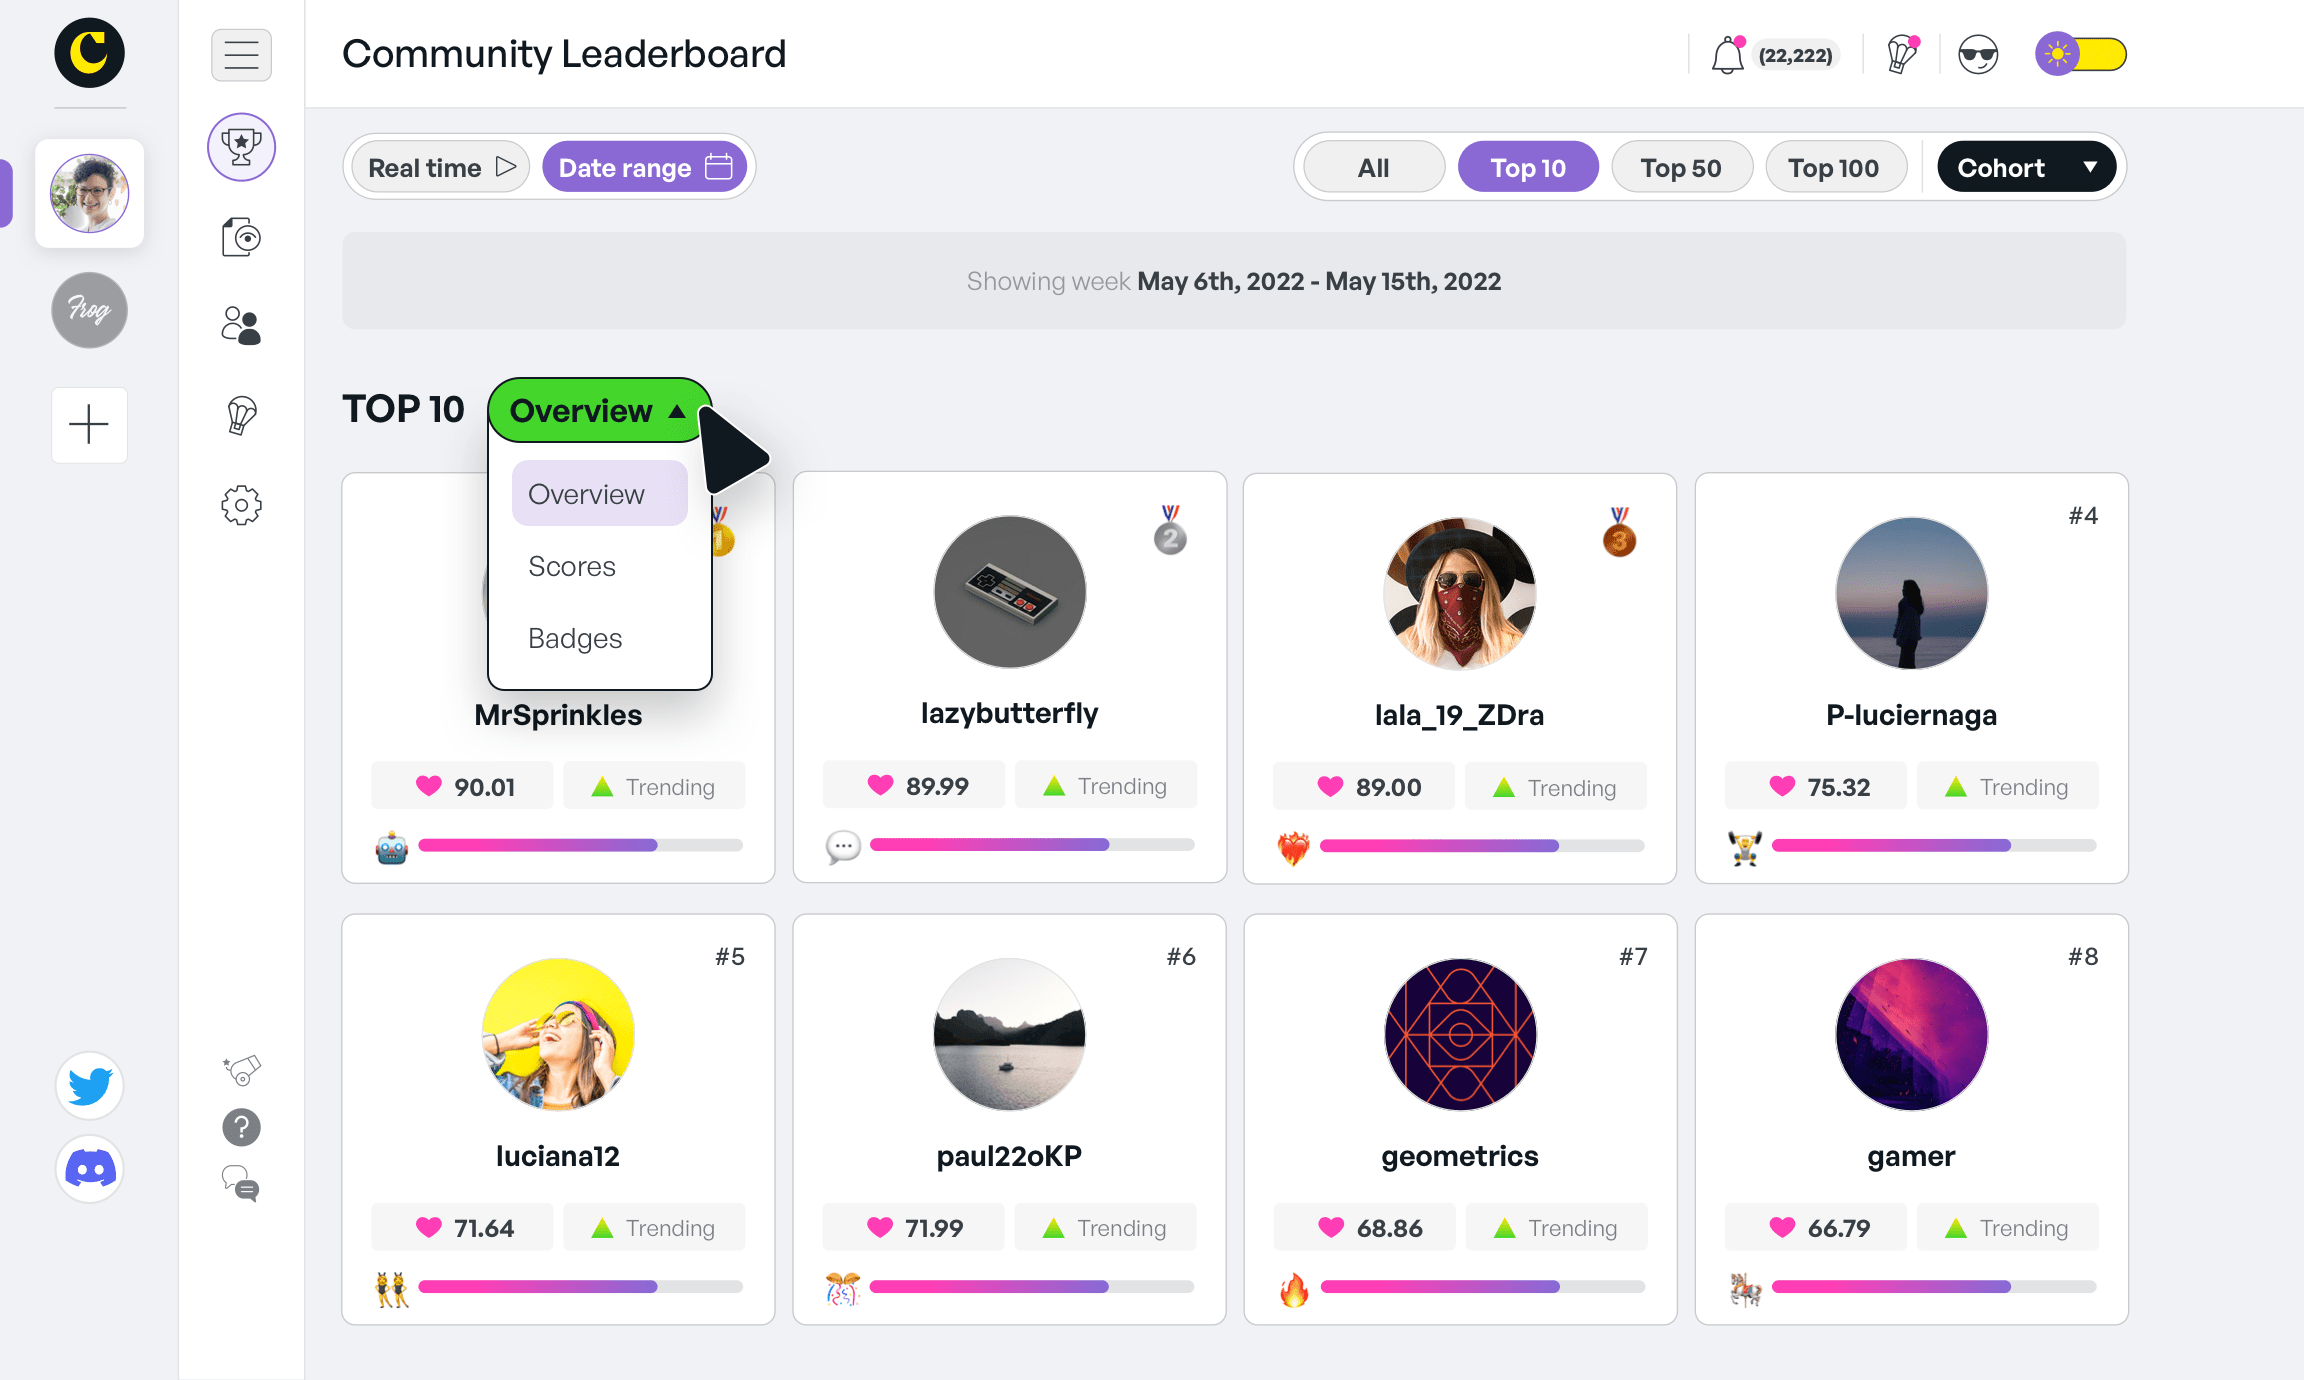 Circus user interface showing community leaderboard